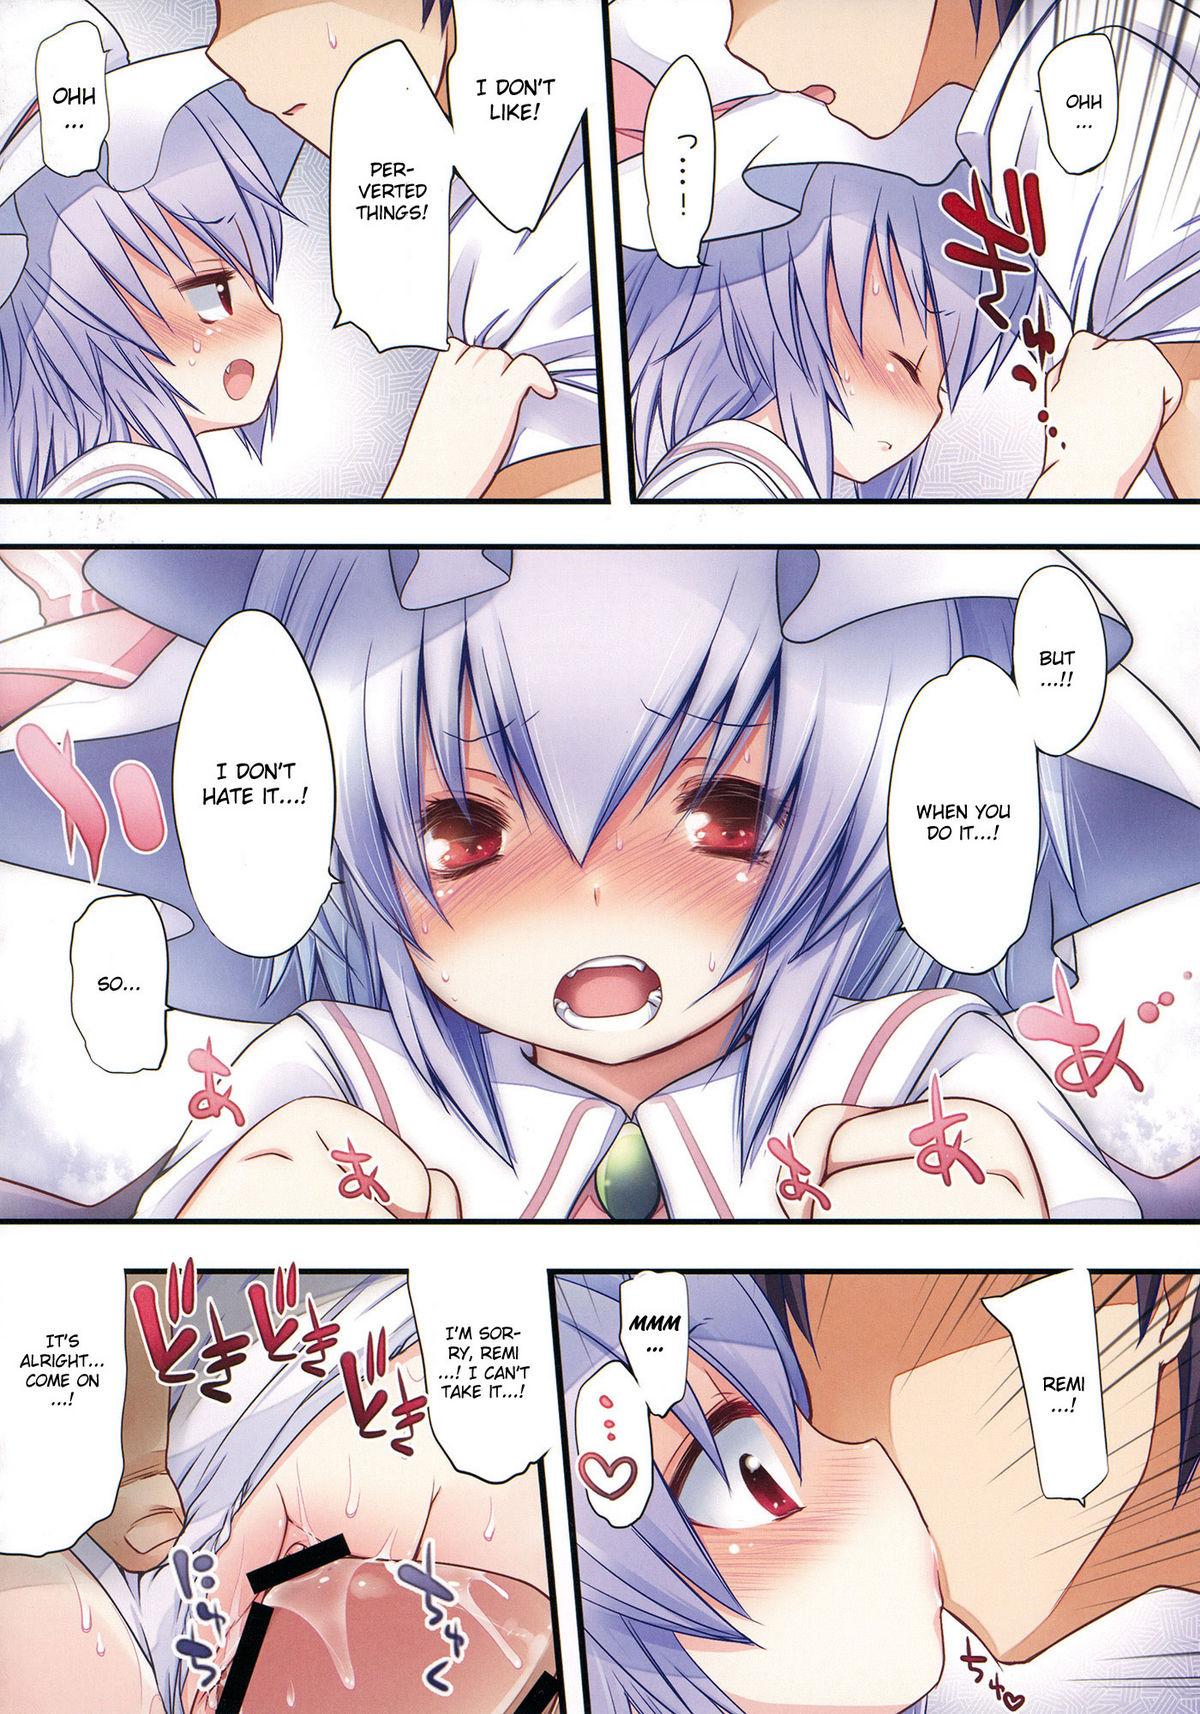 Sperm Pedoria!! Tinkle scarlet R - Touhou project Edging - Page 11